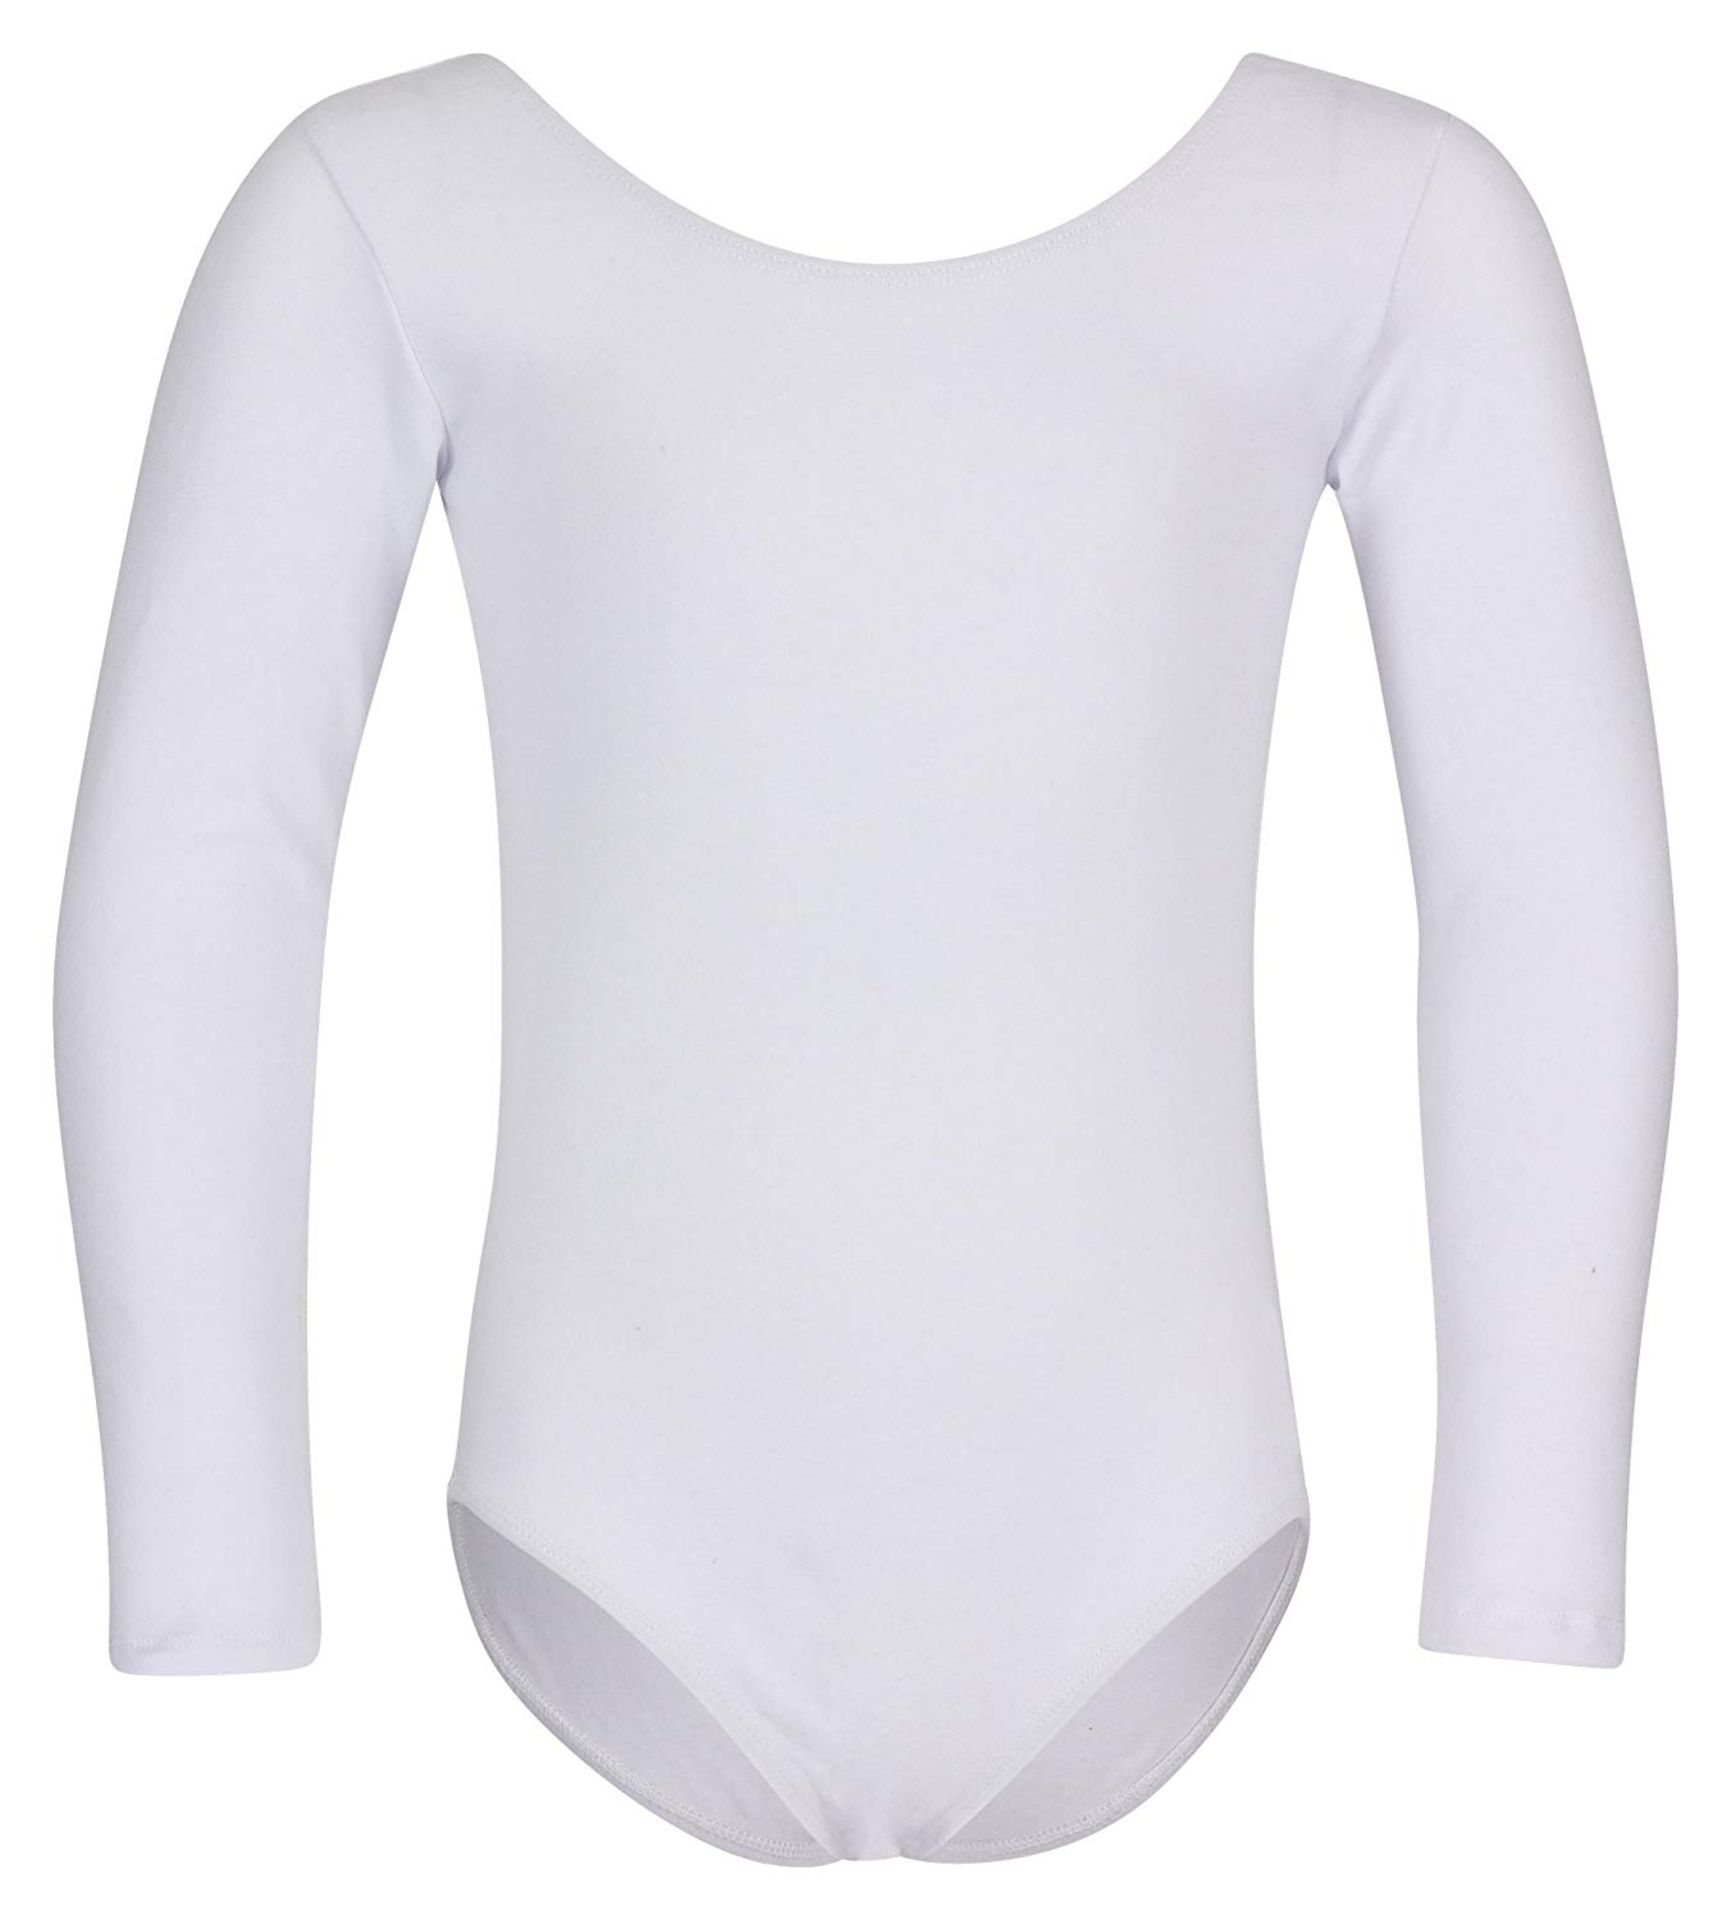 Brand new tanzmuster ballet leotard 'Lilly' for girls Size EU 140/146